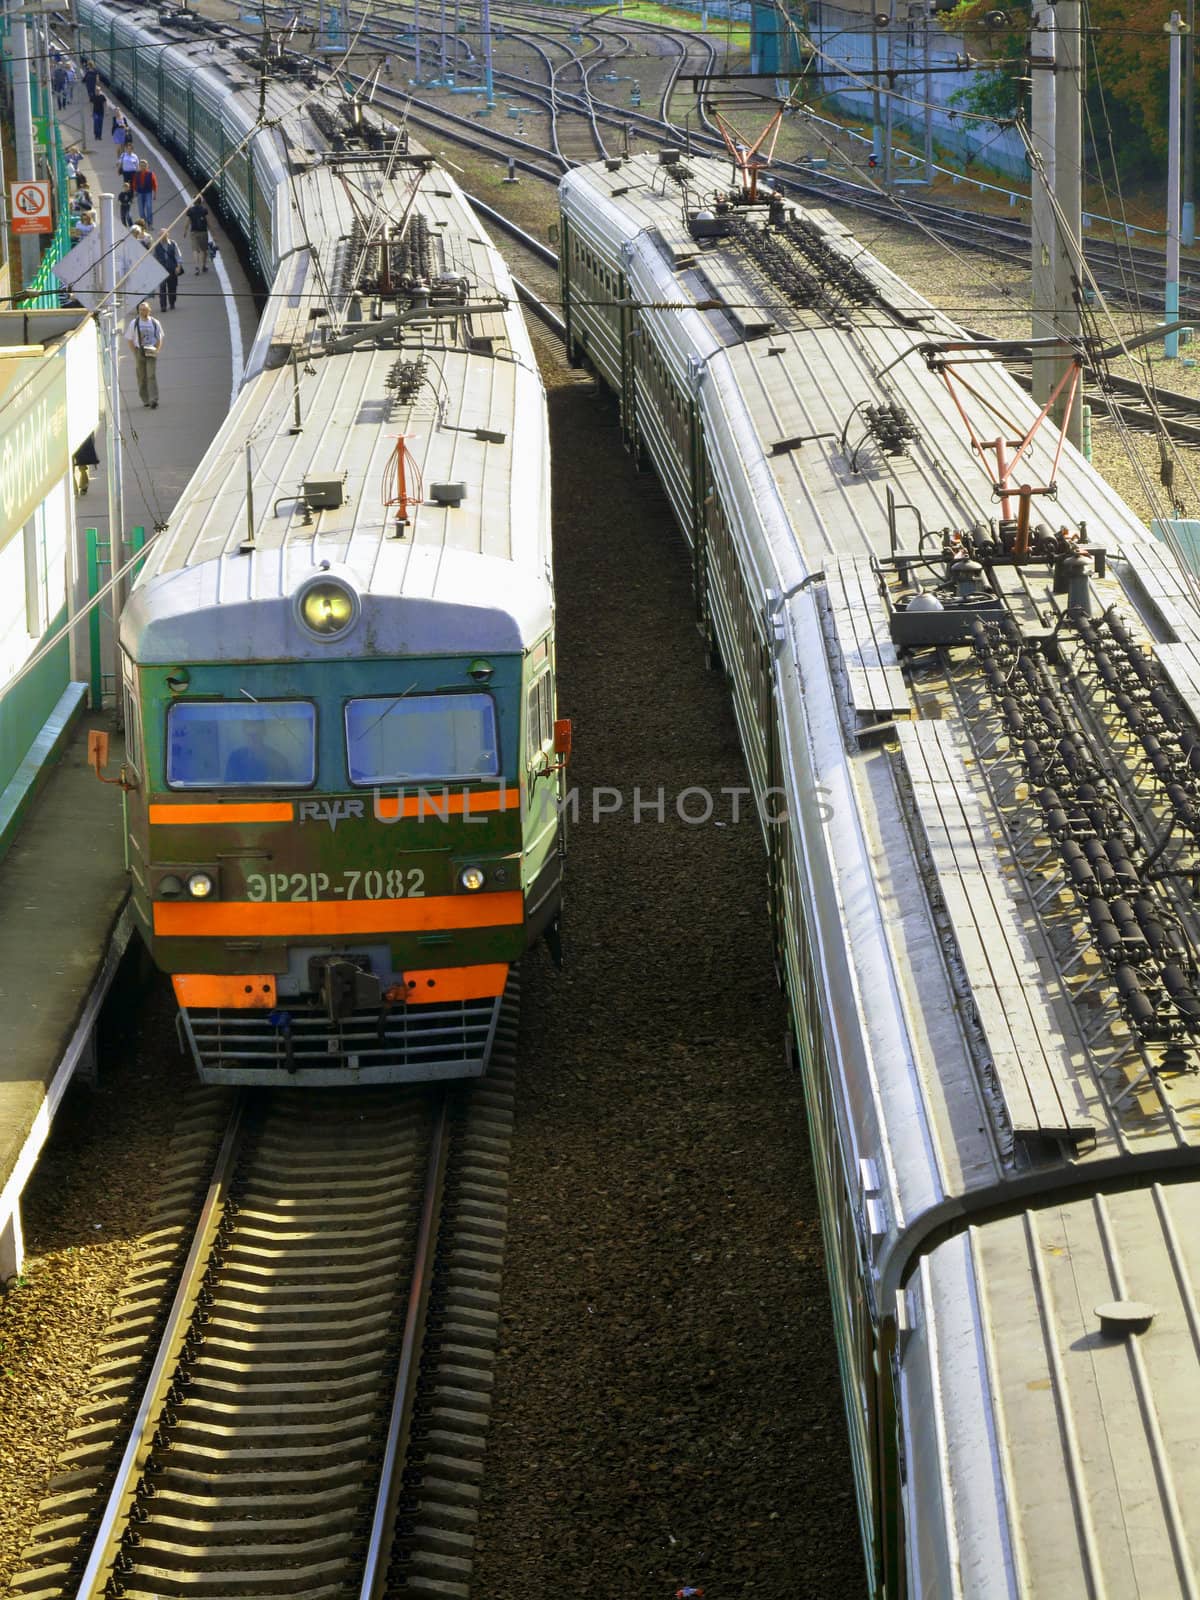  Two local trains near the Moscow, Russia                             